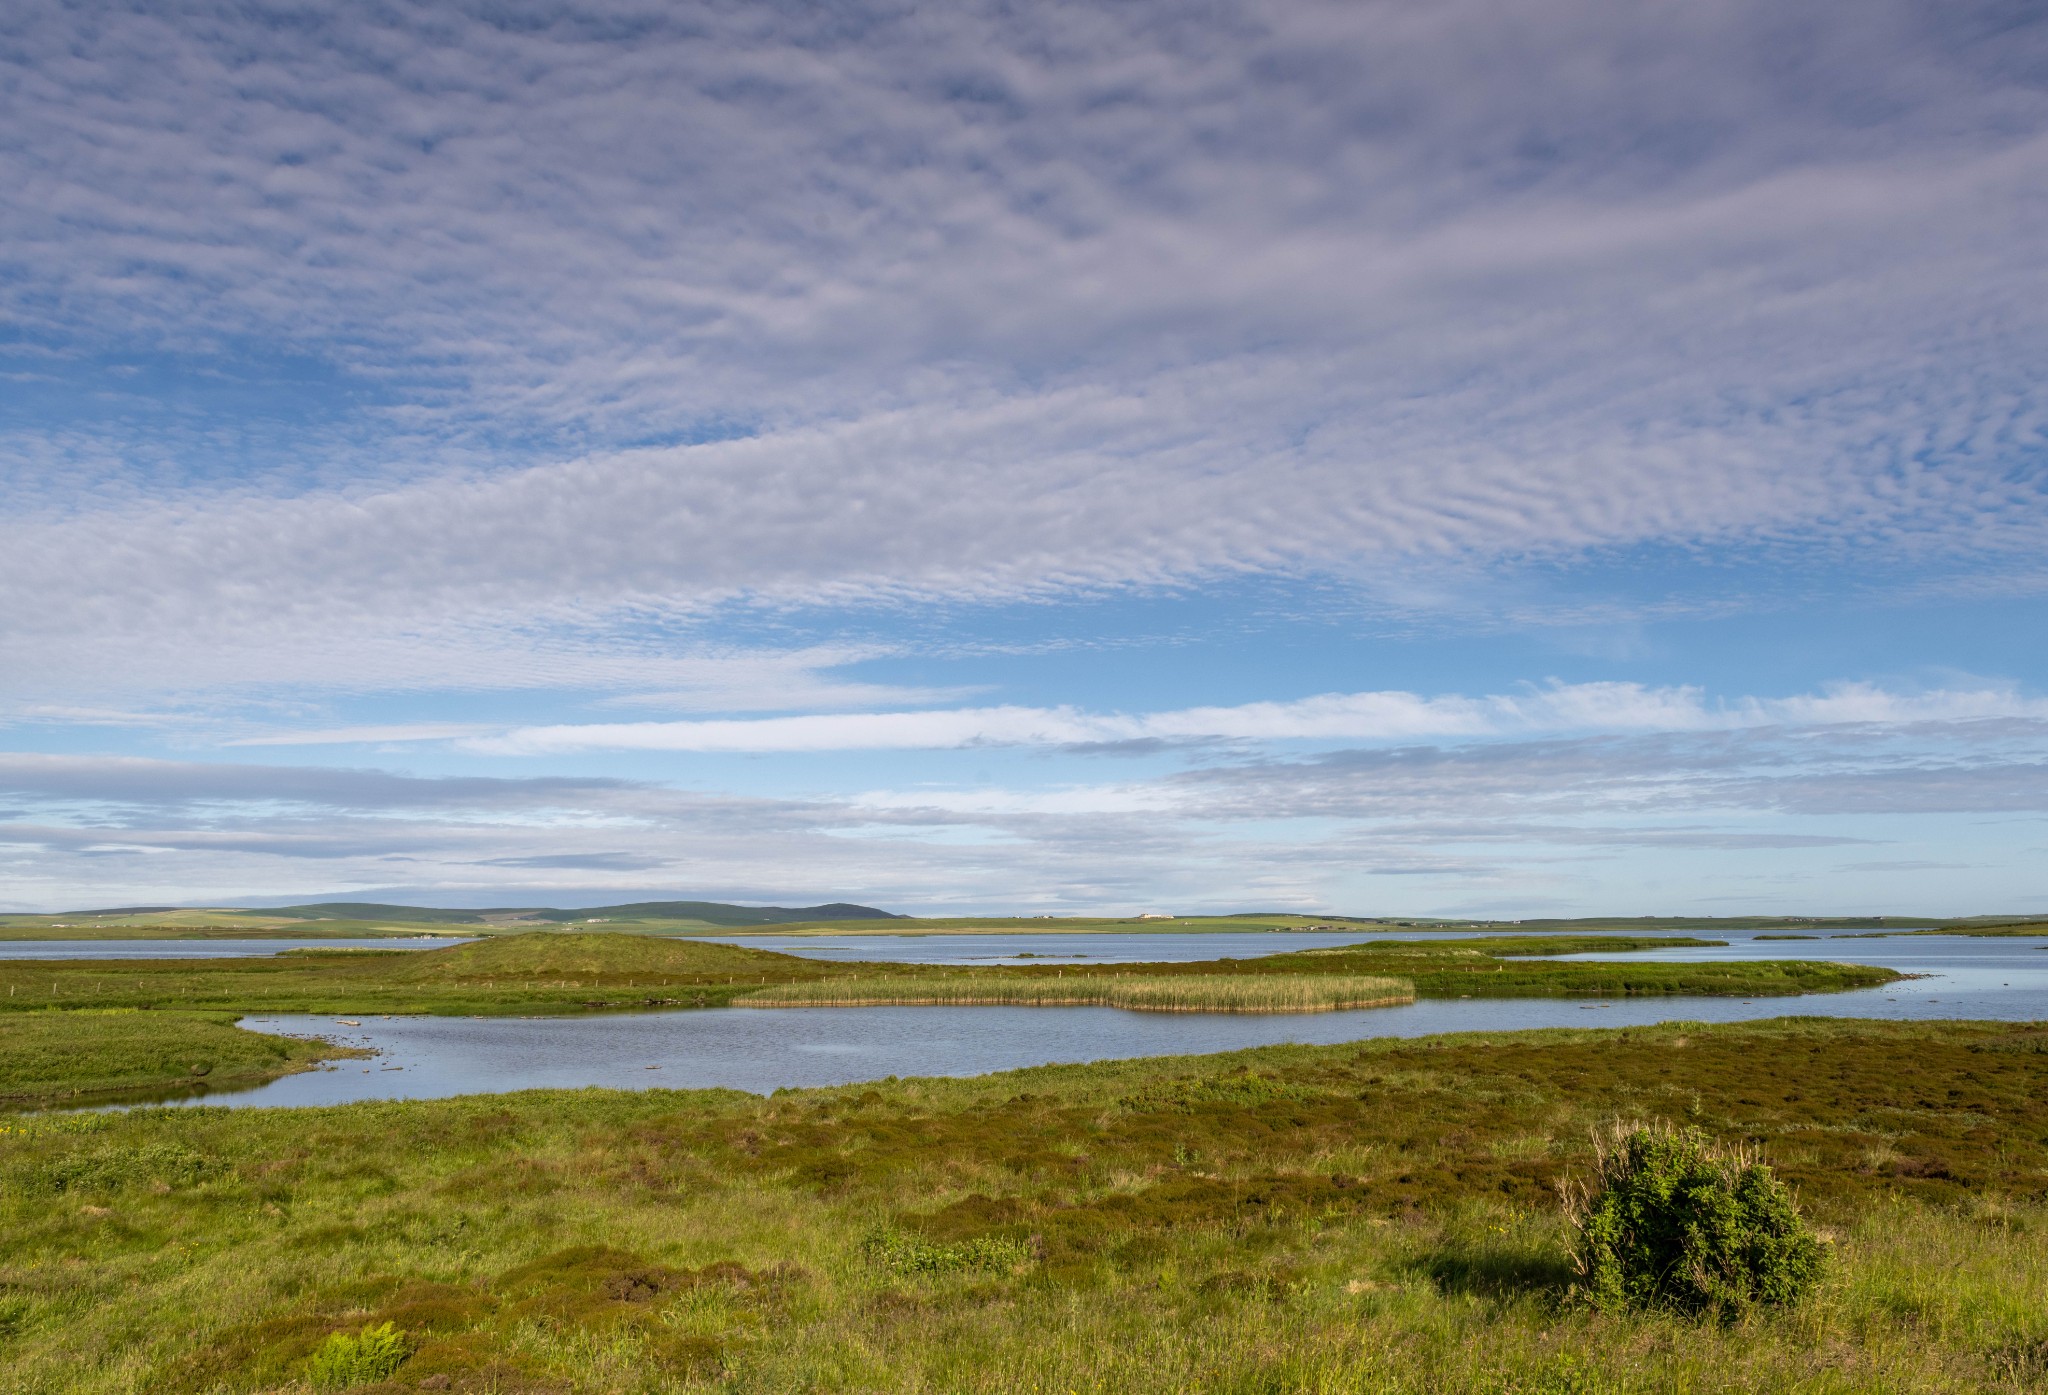 View from Lochside, Orkney - image by Raymond Besant